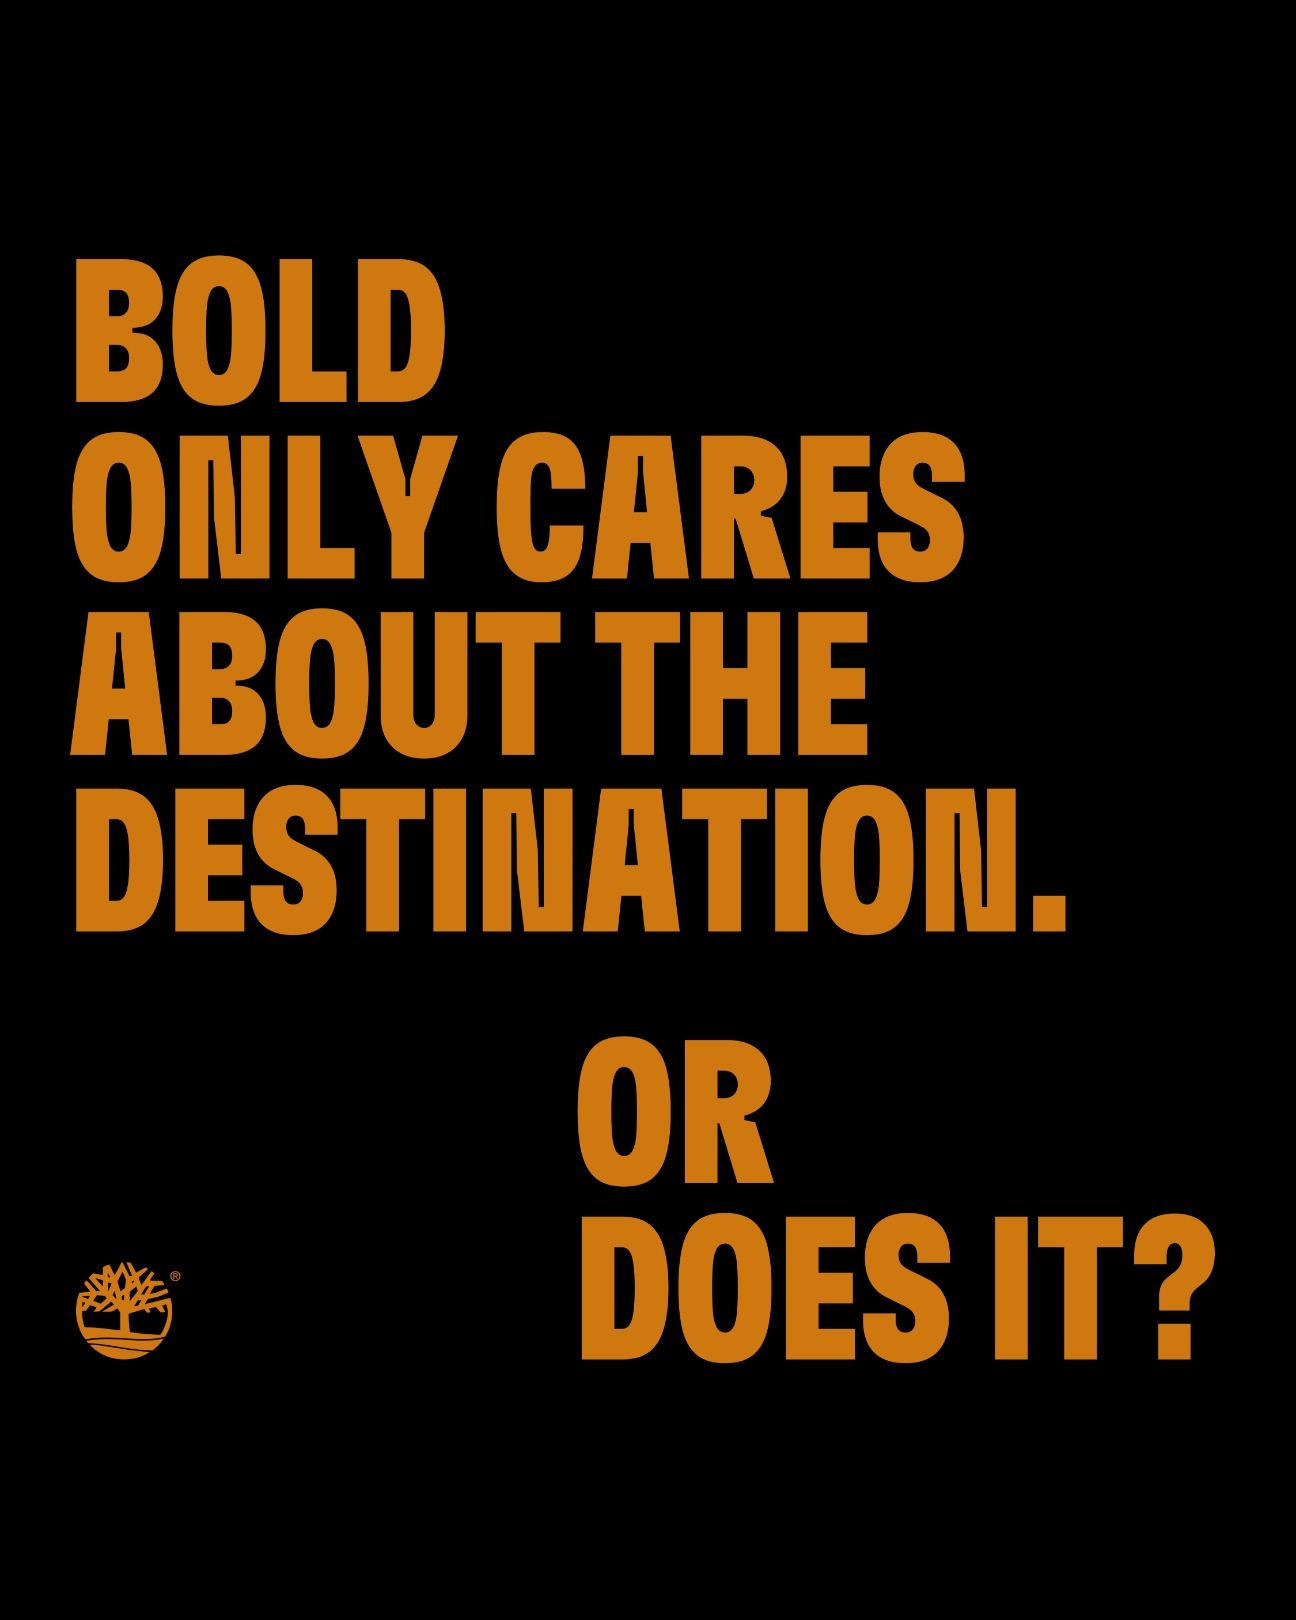 Bold only cares about the destination. Or does it?